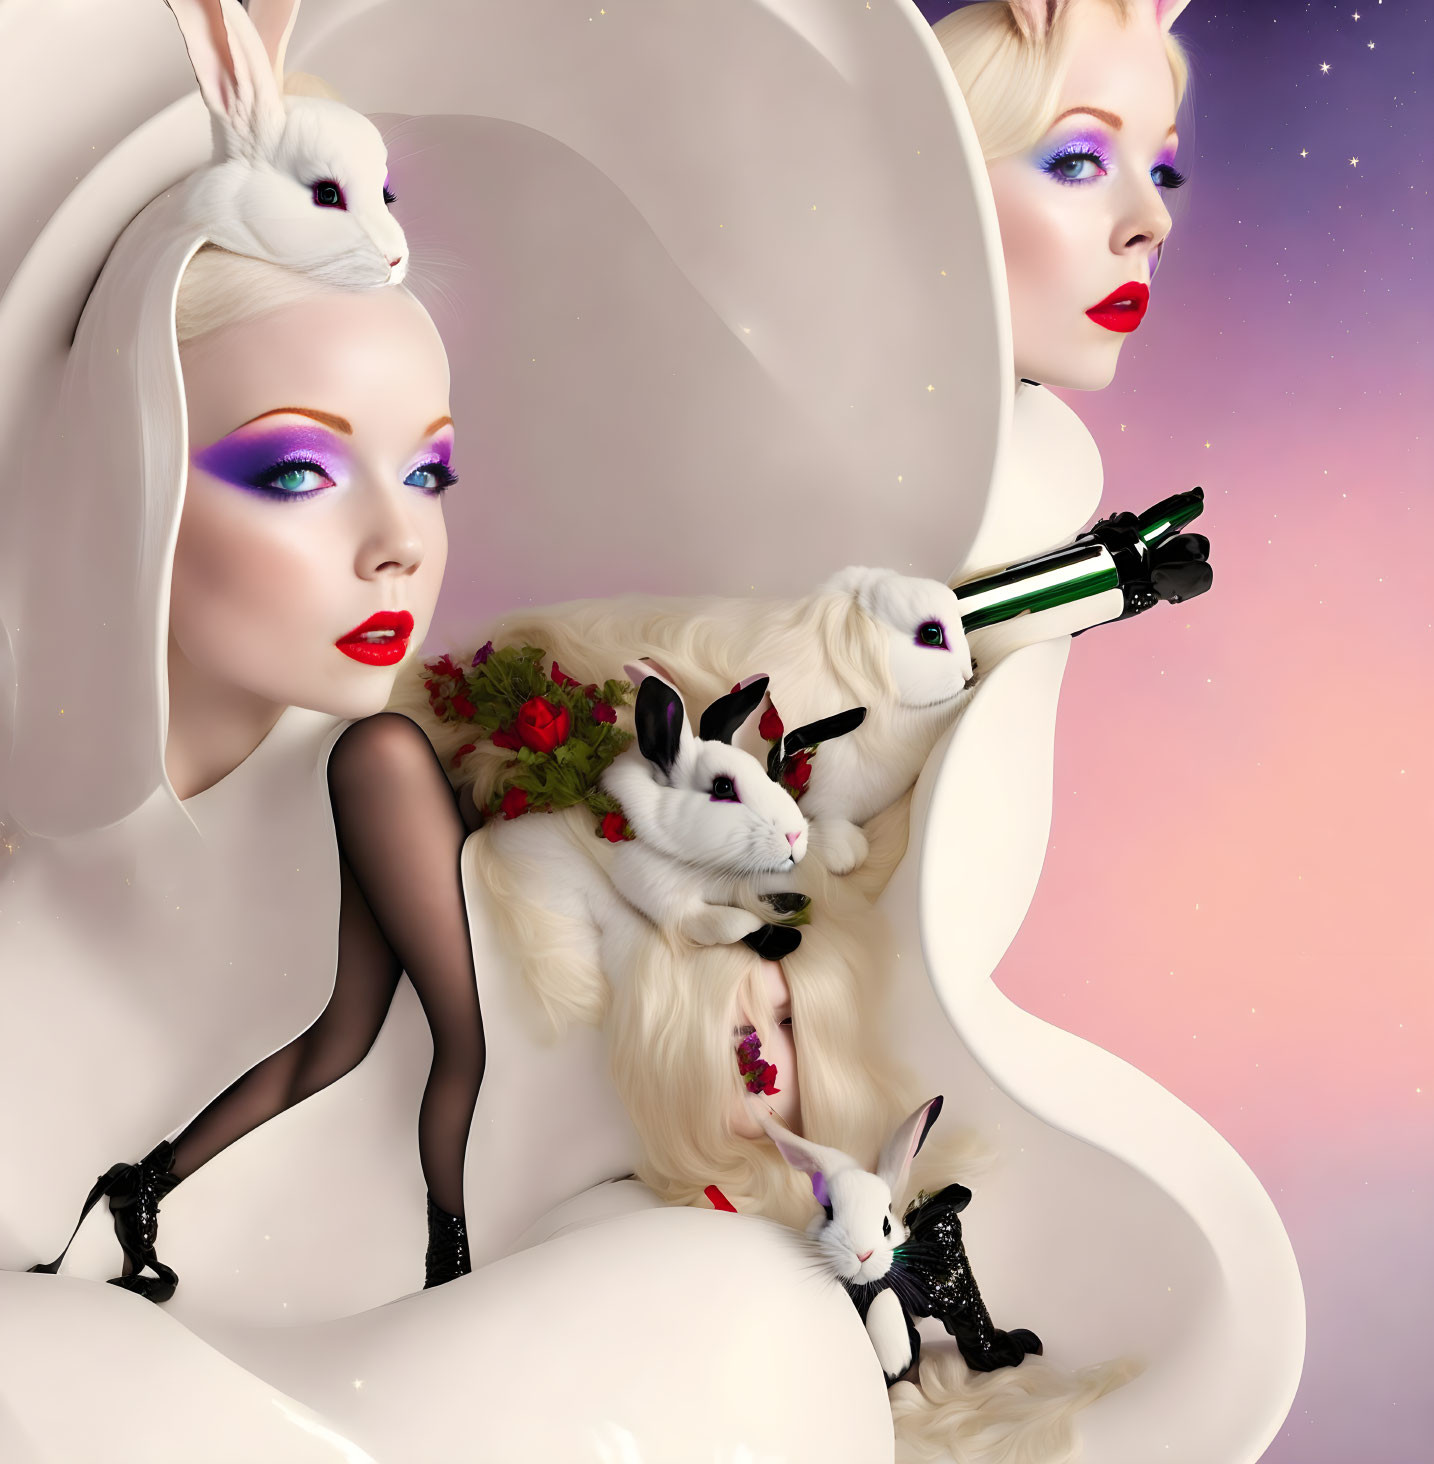 Woman with white rabbits and vibrant makeup in surreal cosmic scene